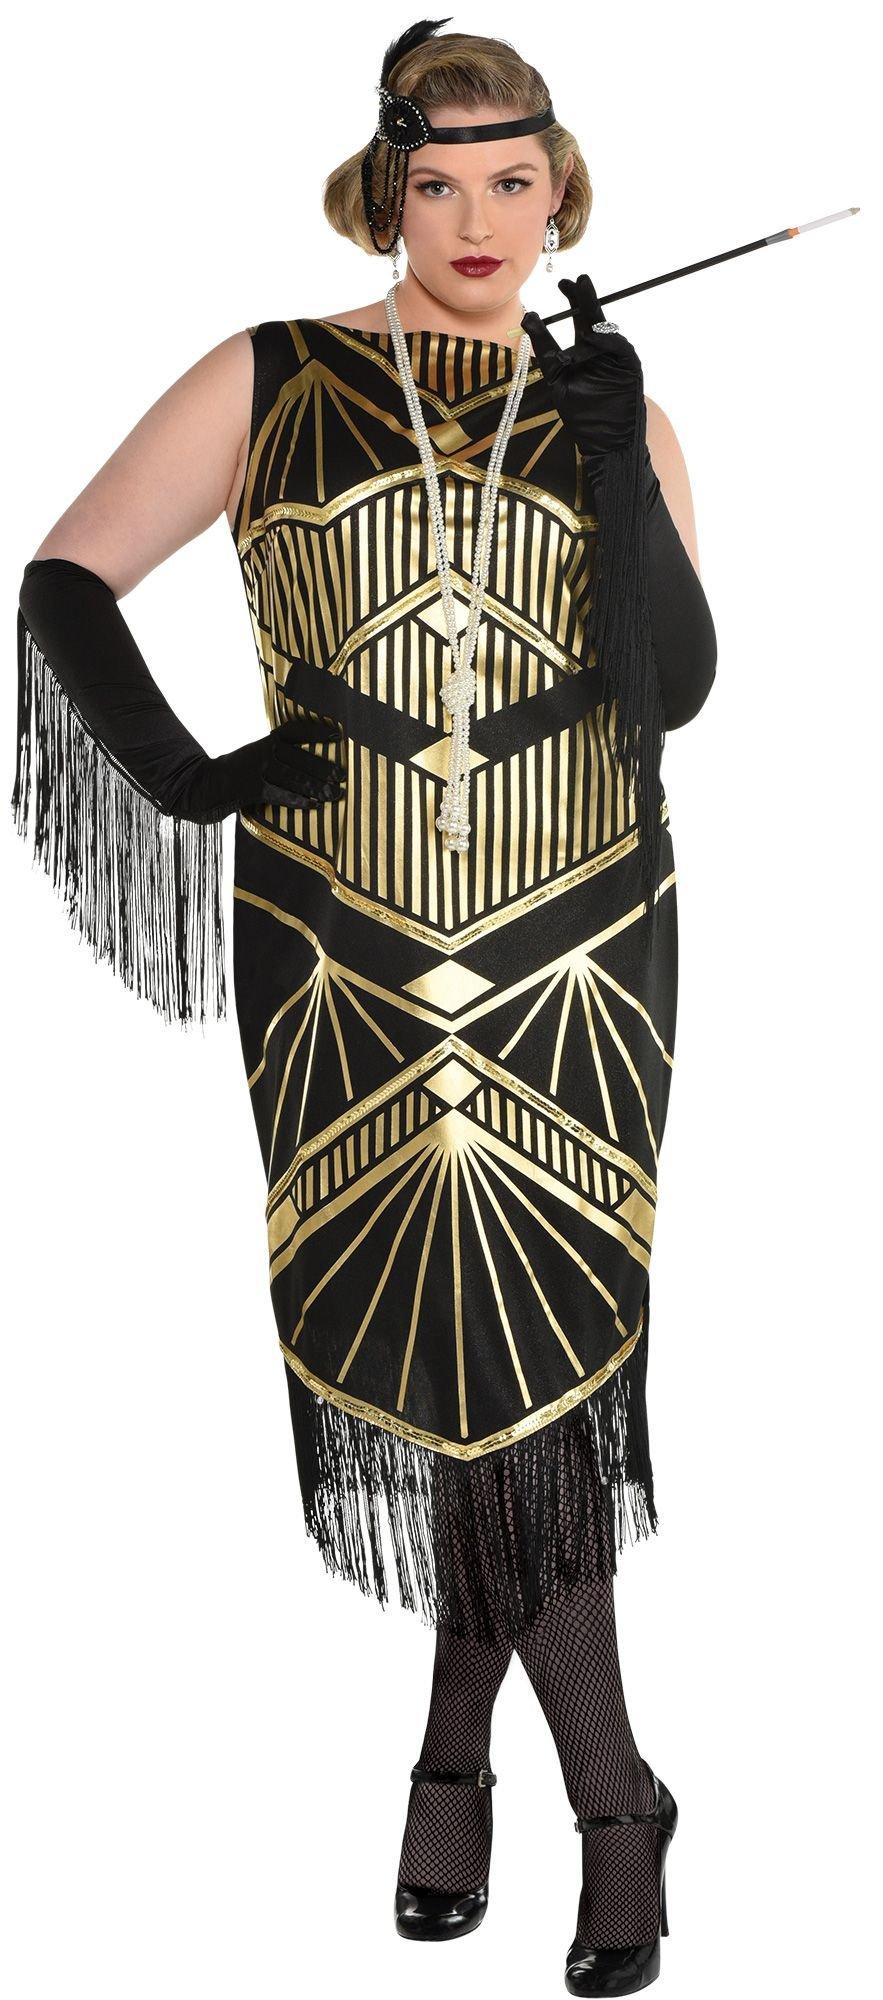 Black and gold Period Dress-Wm Pd Dr 1301-BB'20-Chest 36 – Costume